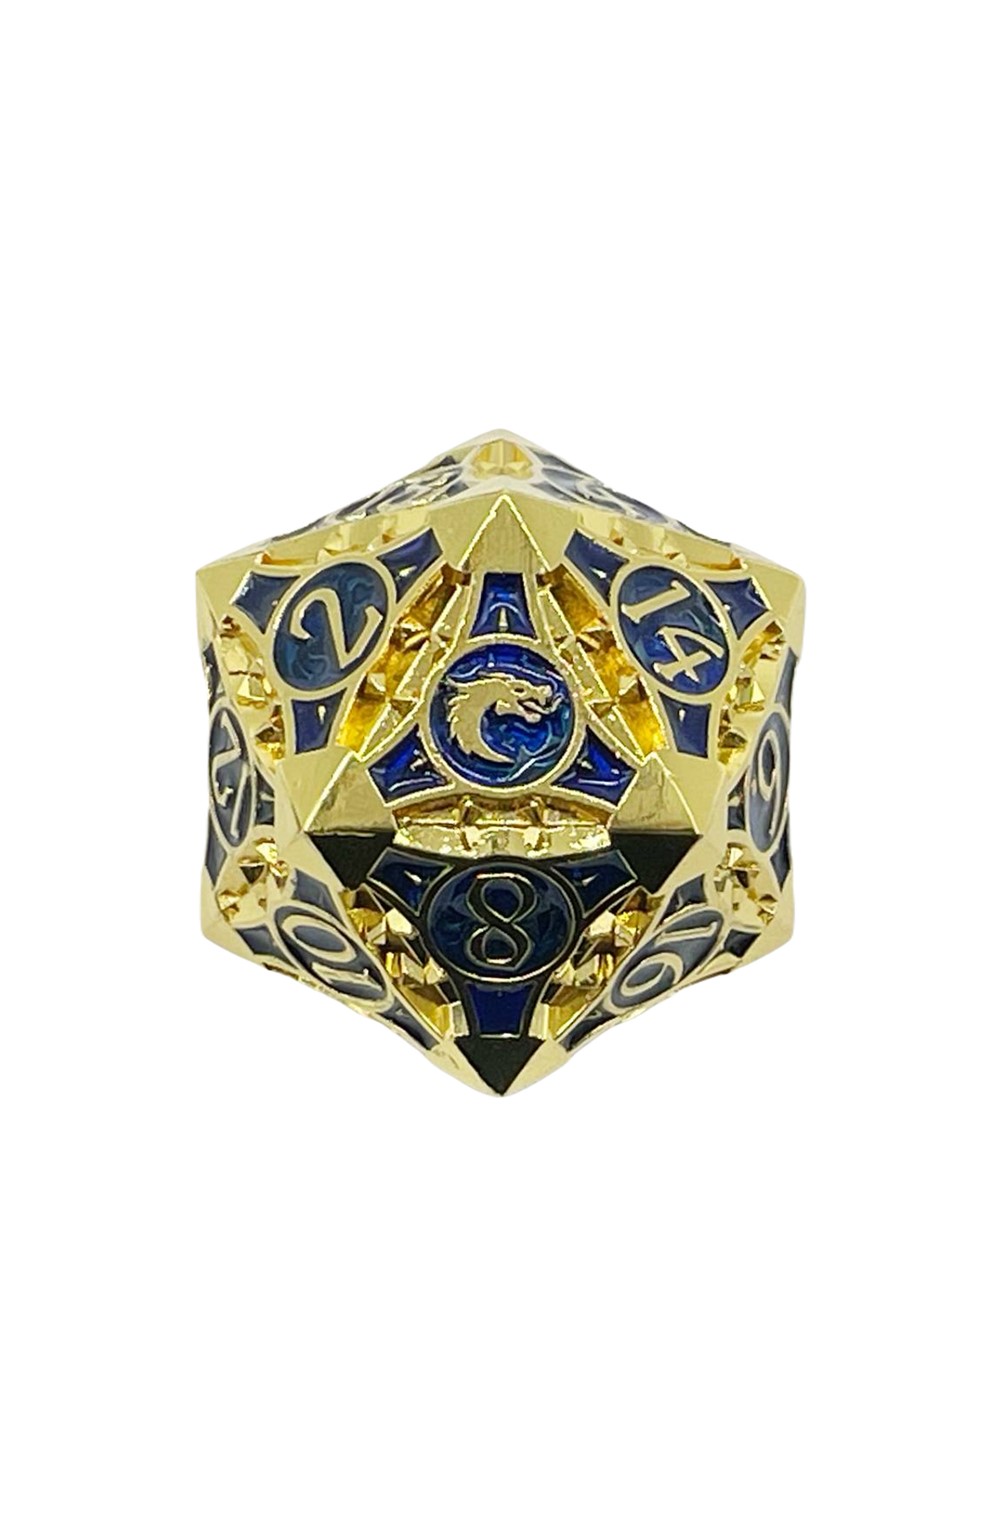 Old School 40mm D20 Metal Die: Gnome Forged - Gold w/ Blue - Old